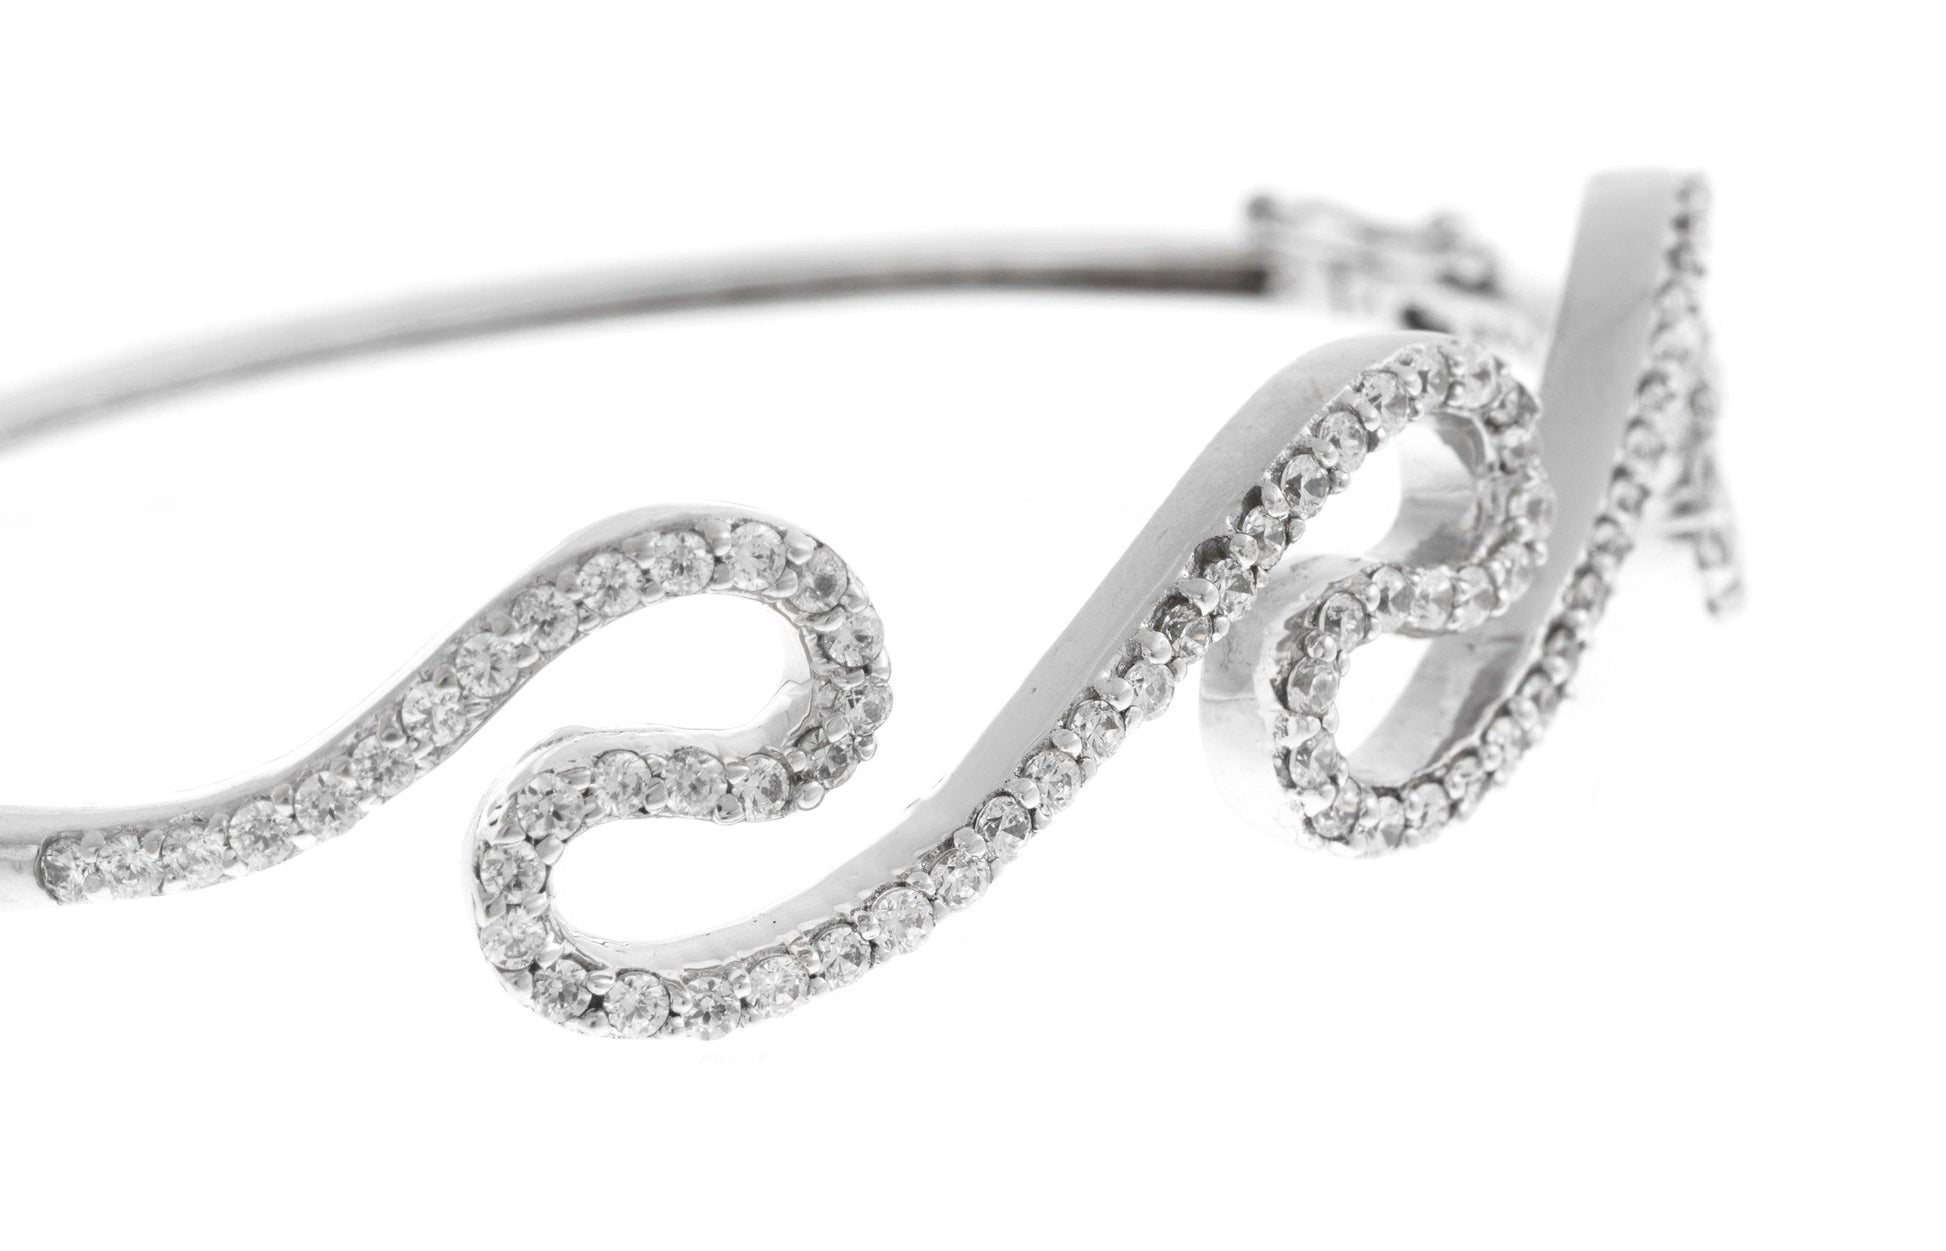 18ct White Gold Bangle with Cubic Zirconia Stones (16.7g) (B-1457) - Minar Jewellers